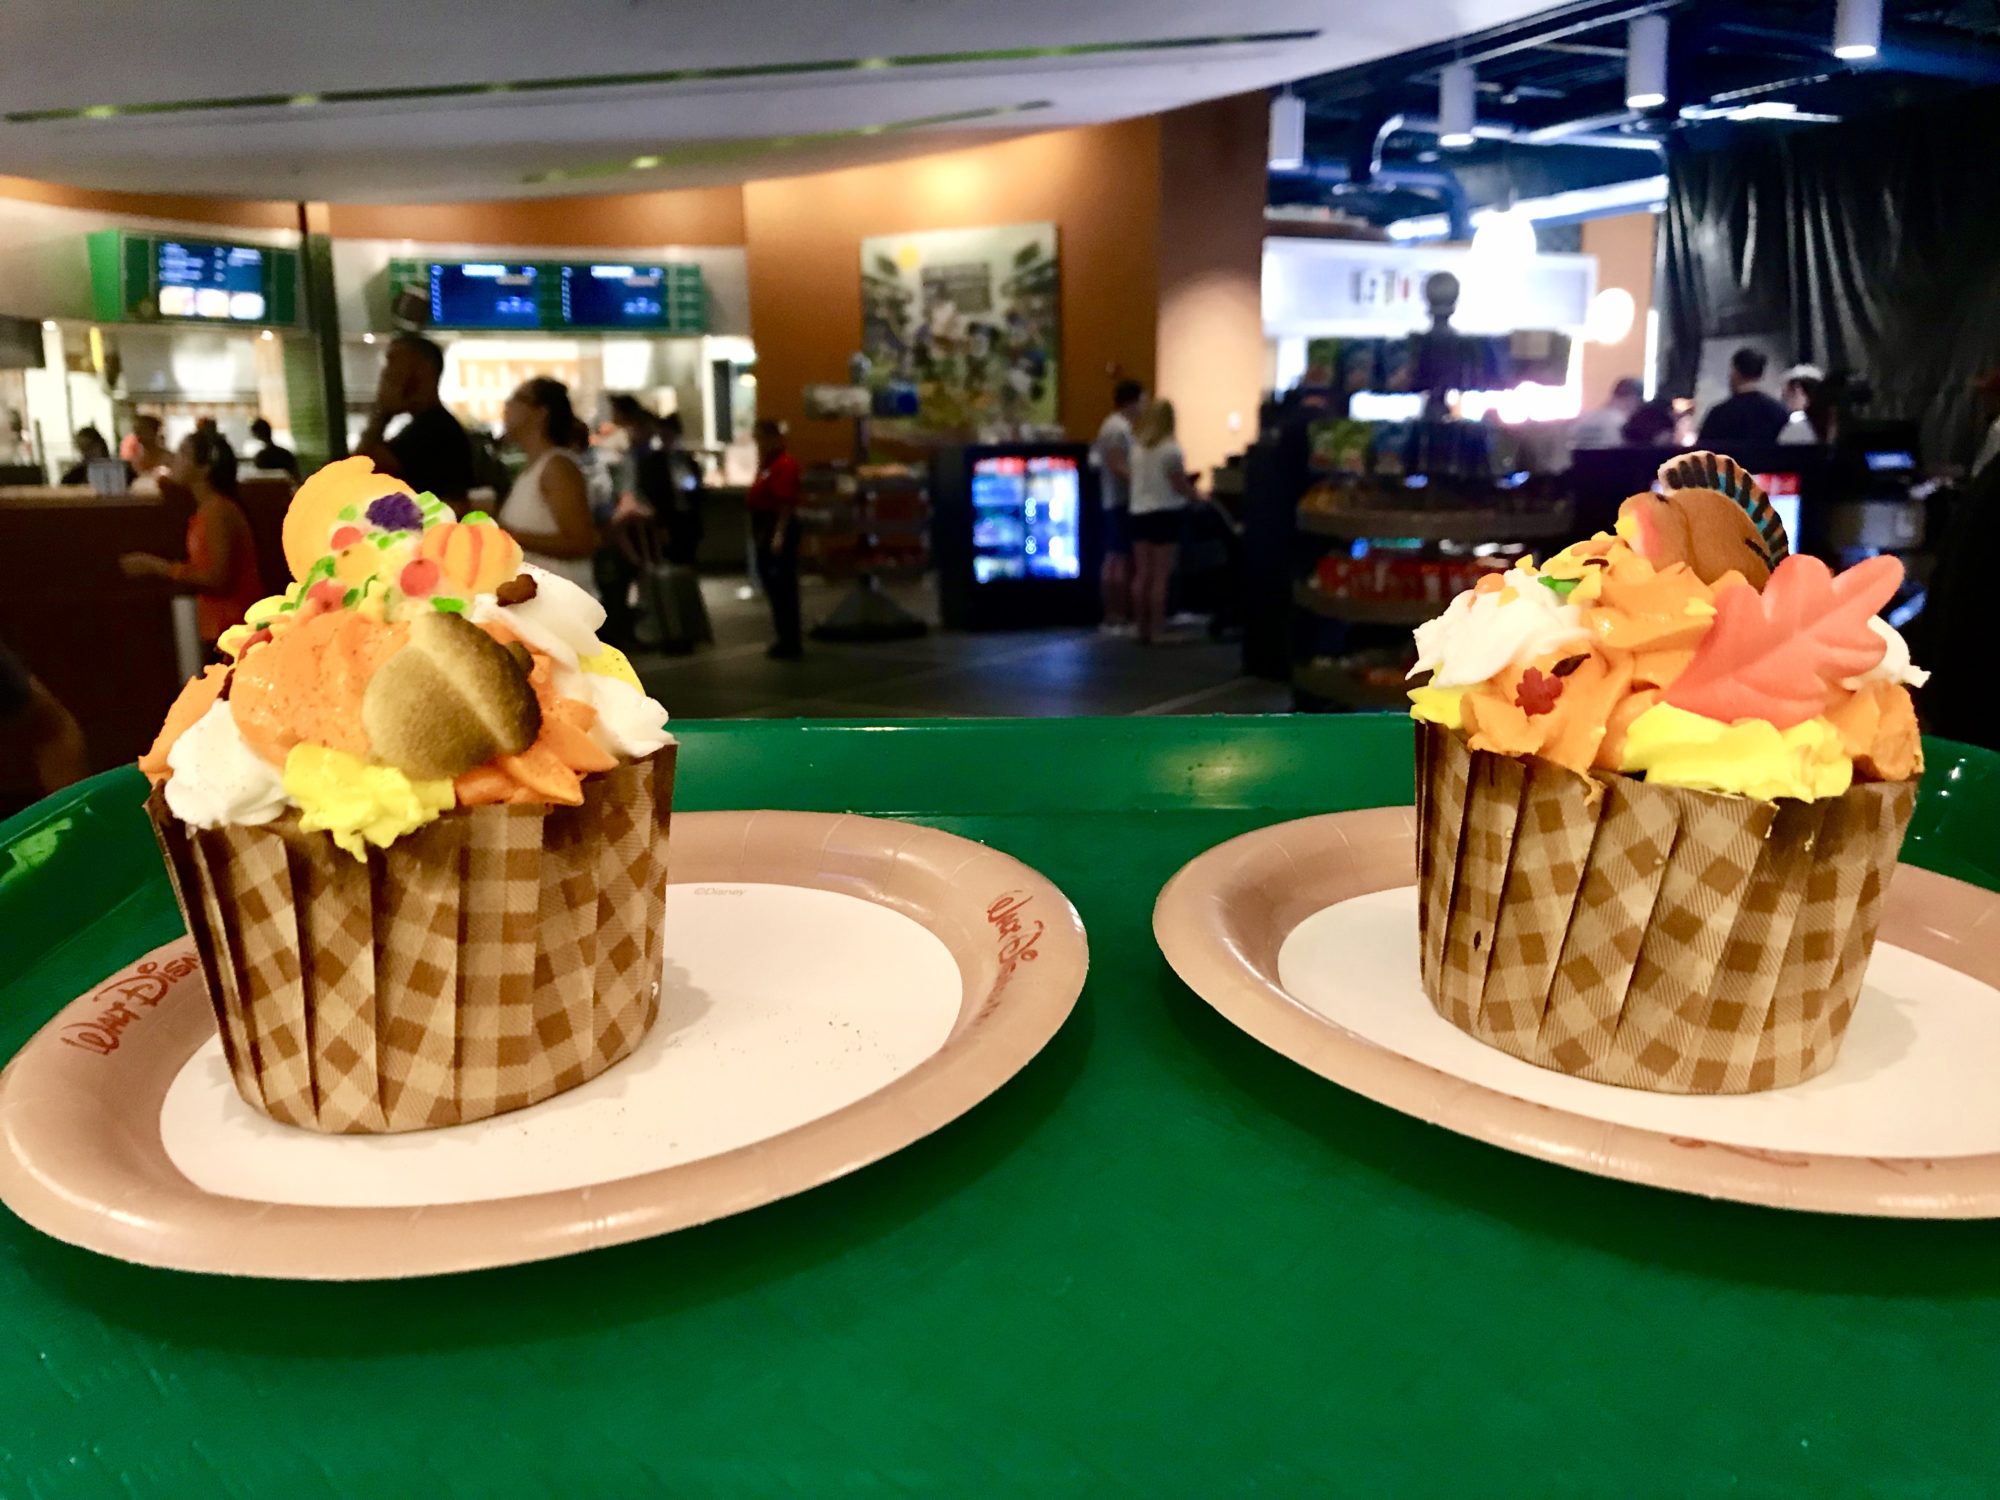 Thanksgiving Feast Cupcakes Arrive at All-Star Resorts